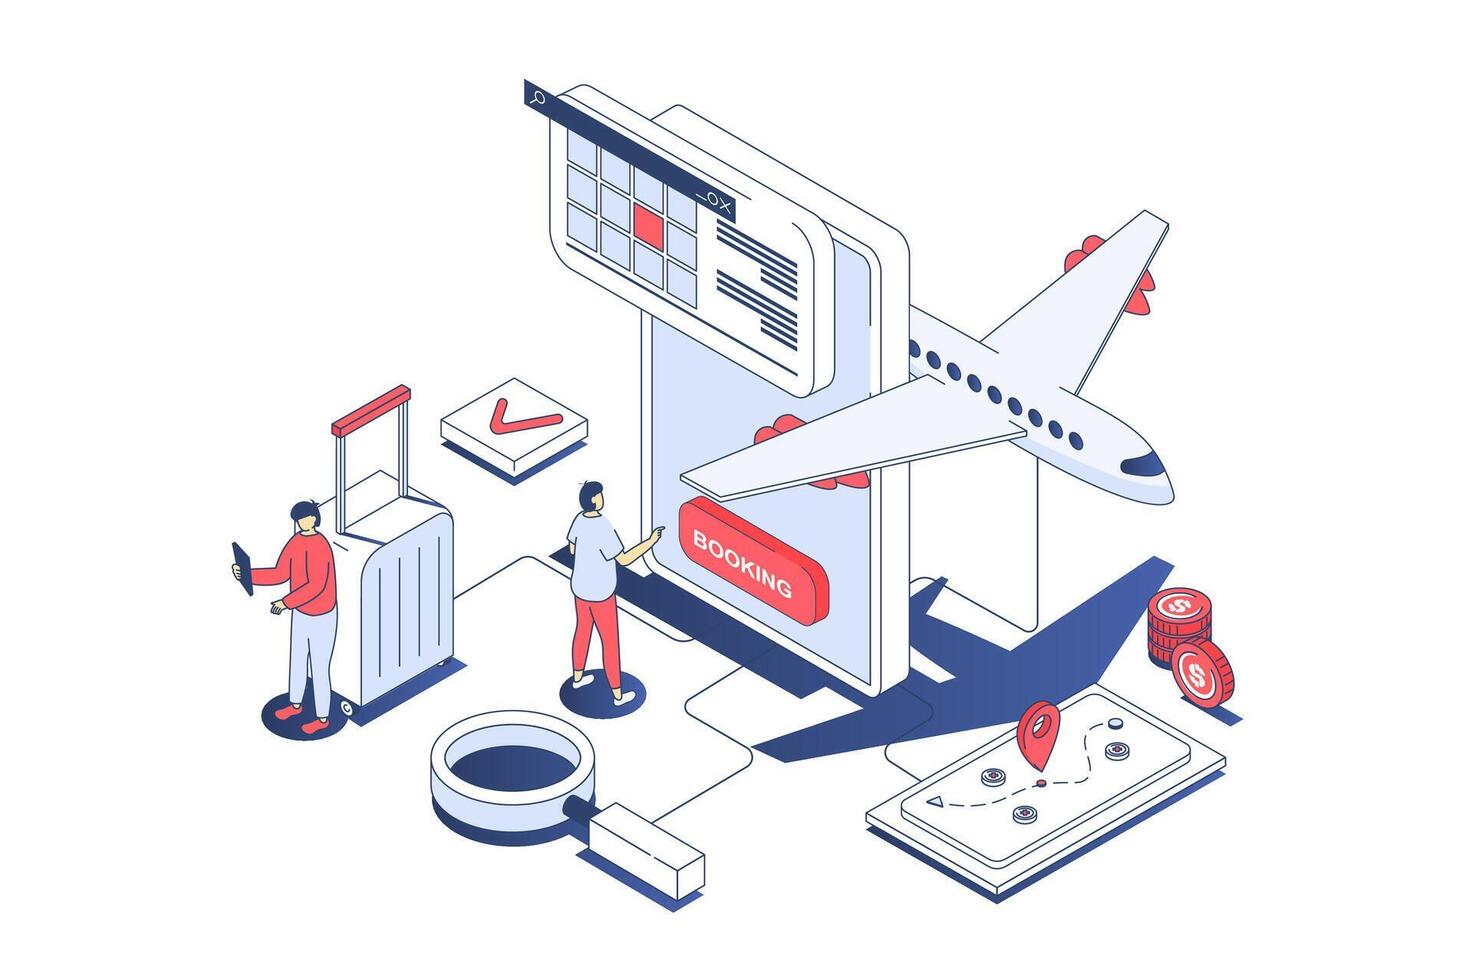 Booking flight concept in 3d isometric design. Travellers planning trips, choosing tour destination, ordering and buying plane tickets. Vector illustration with isometry people scene for web graphic